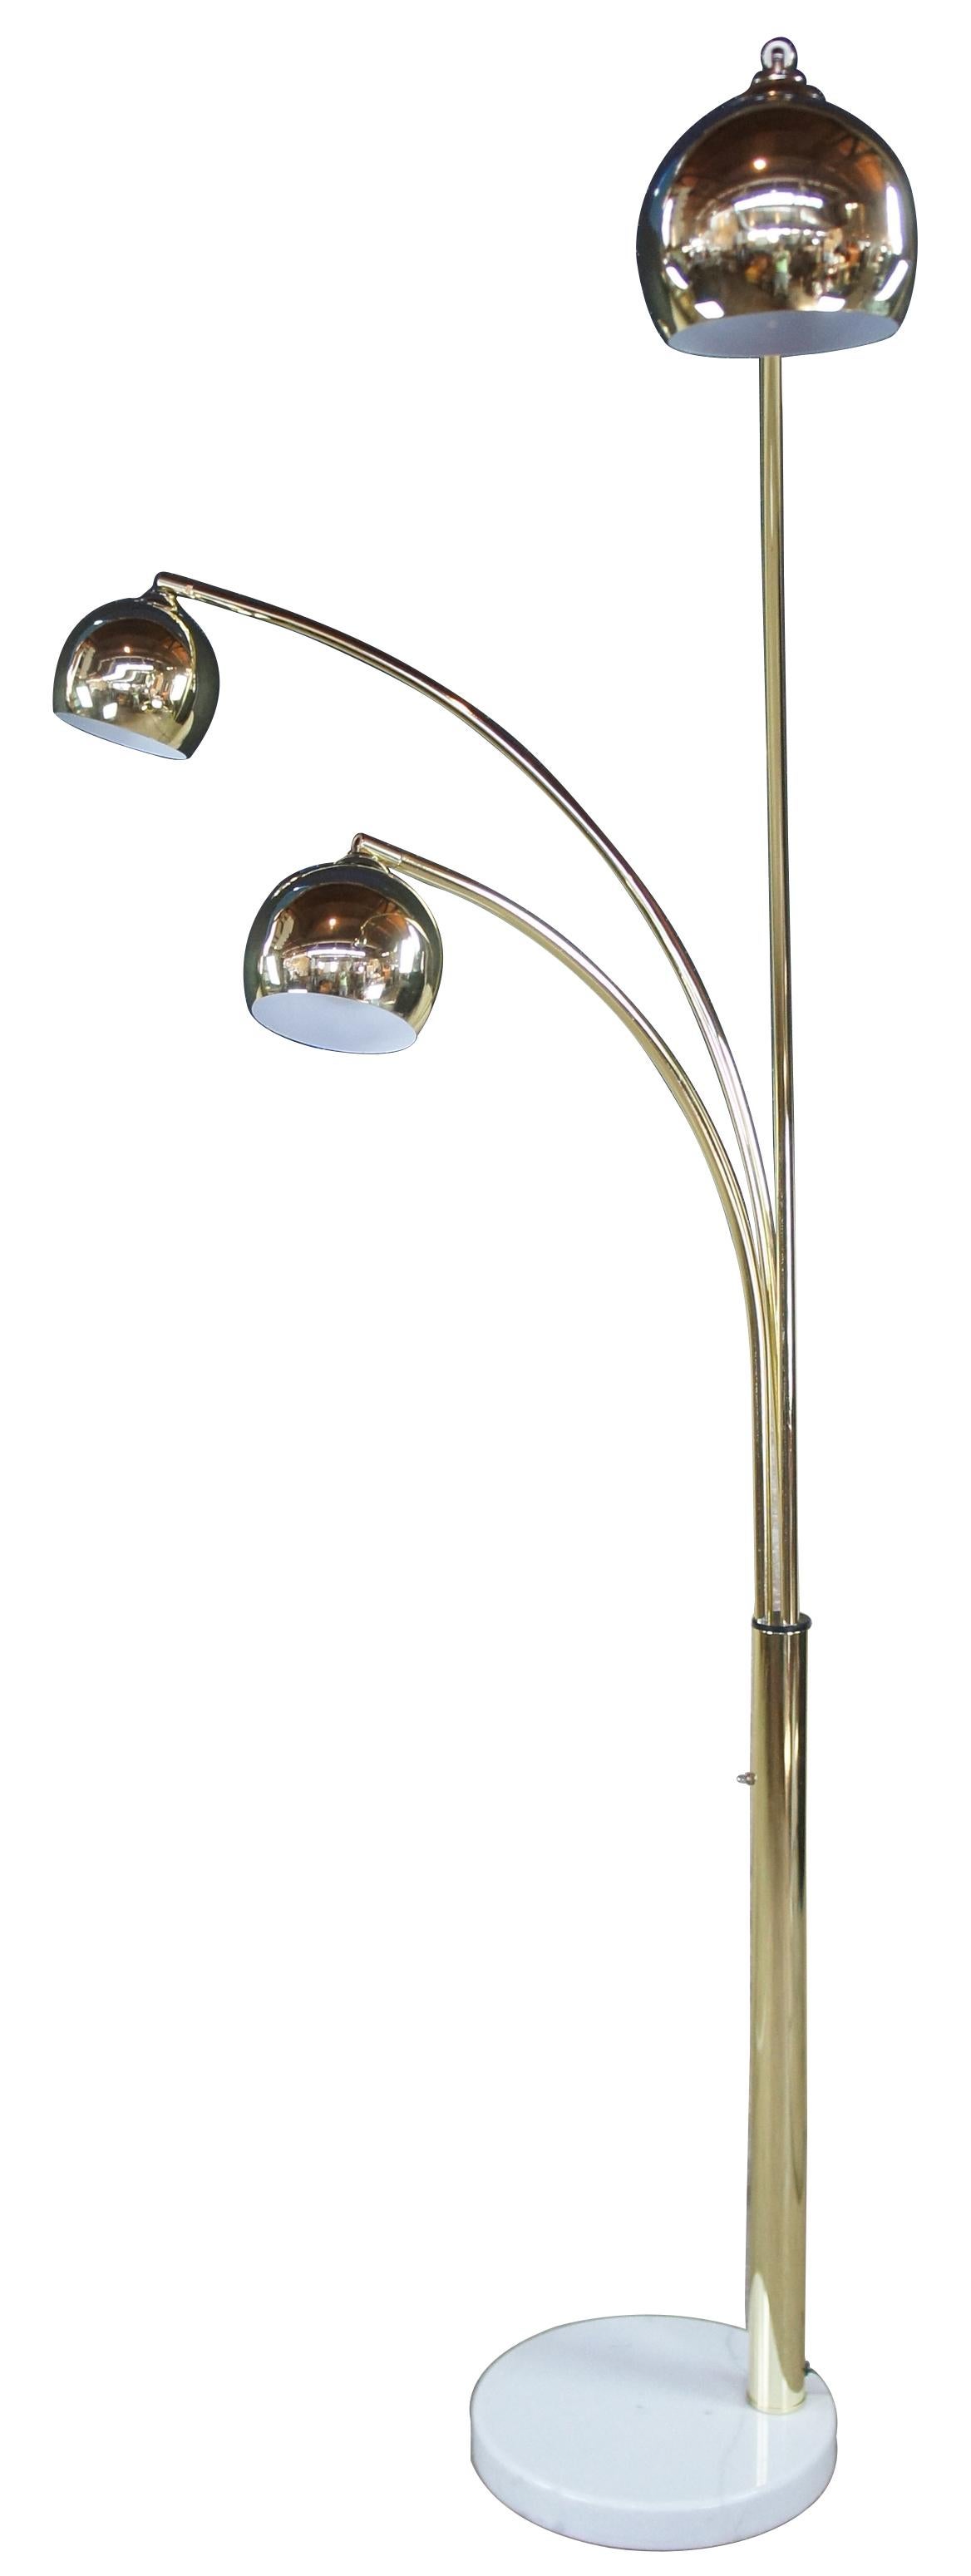 1960s 3 arm adjustable arc floor lamp. Polished brass over a white marble base. In the manner of Robert Sonneman.
 